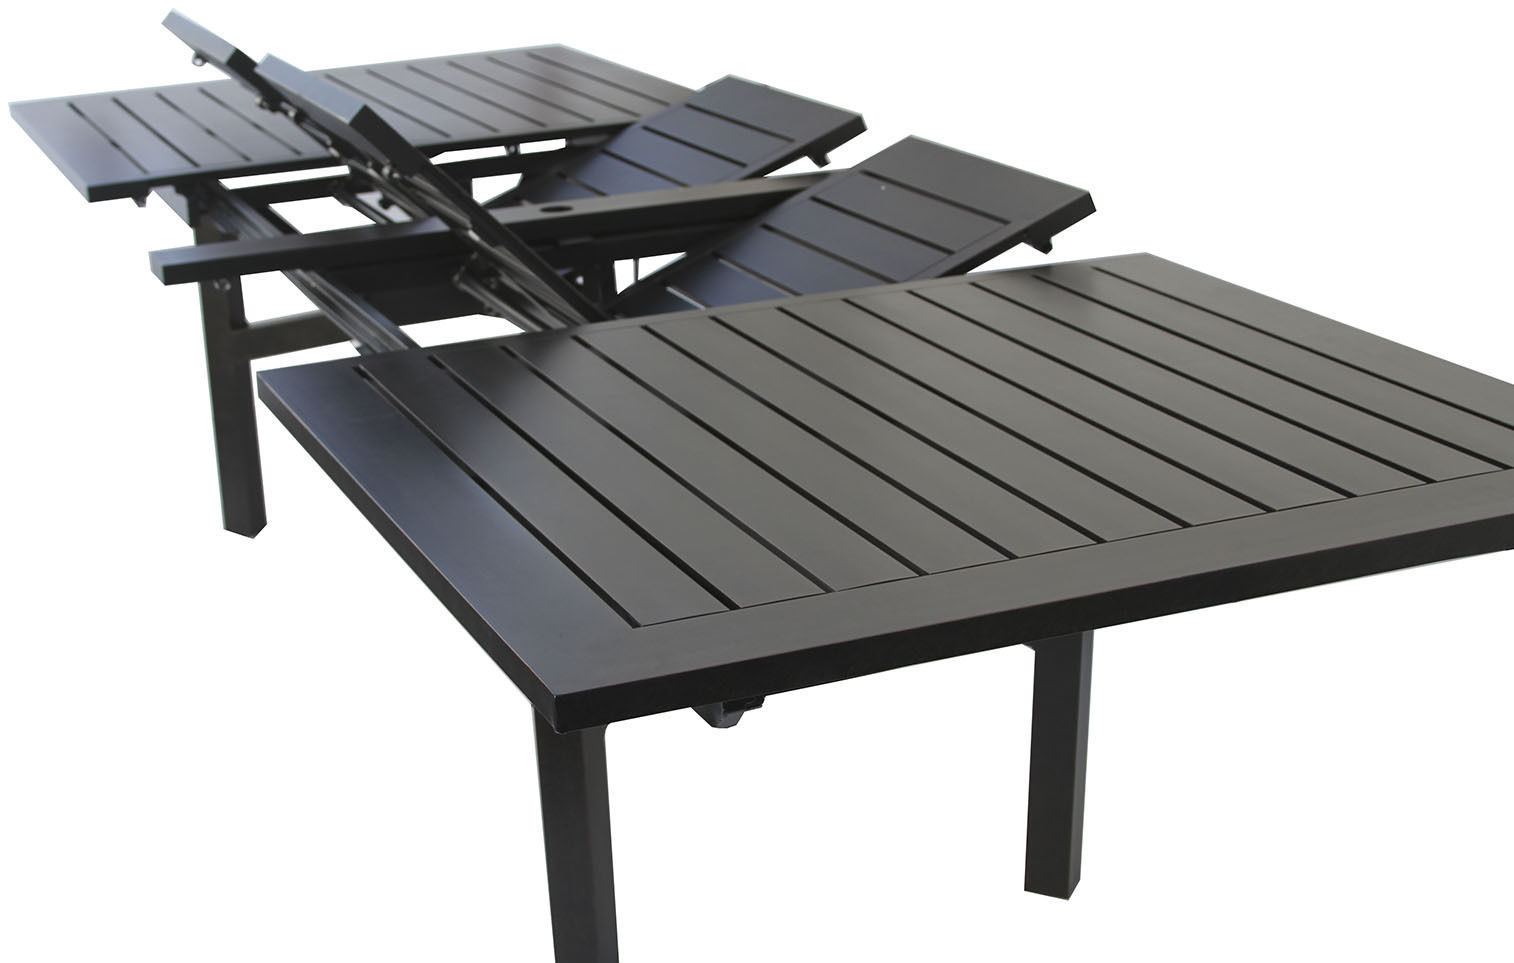 Expandable OUTDOOR PATIO 44X130 RECTANGLE EXTENDABLE DINING TABLE - $3,267.00